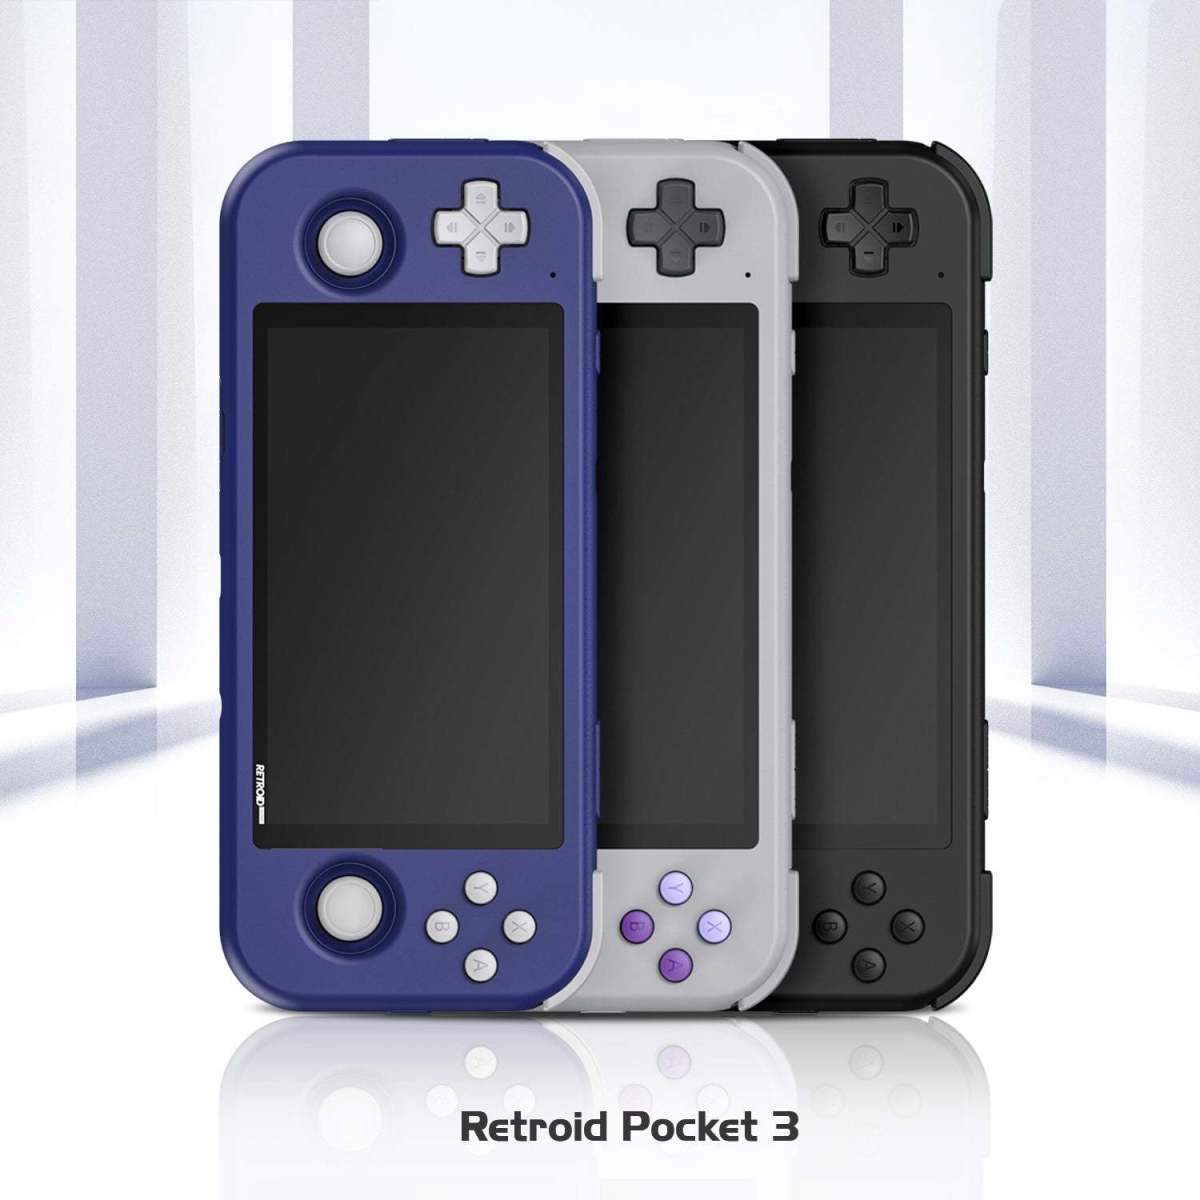 Retroid Pocket 3 Review - Should You Buy It?